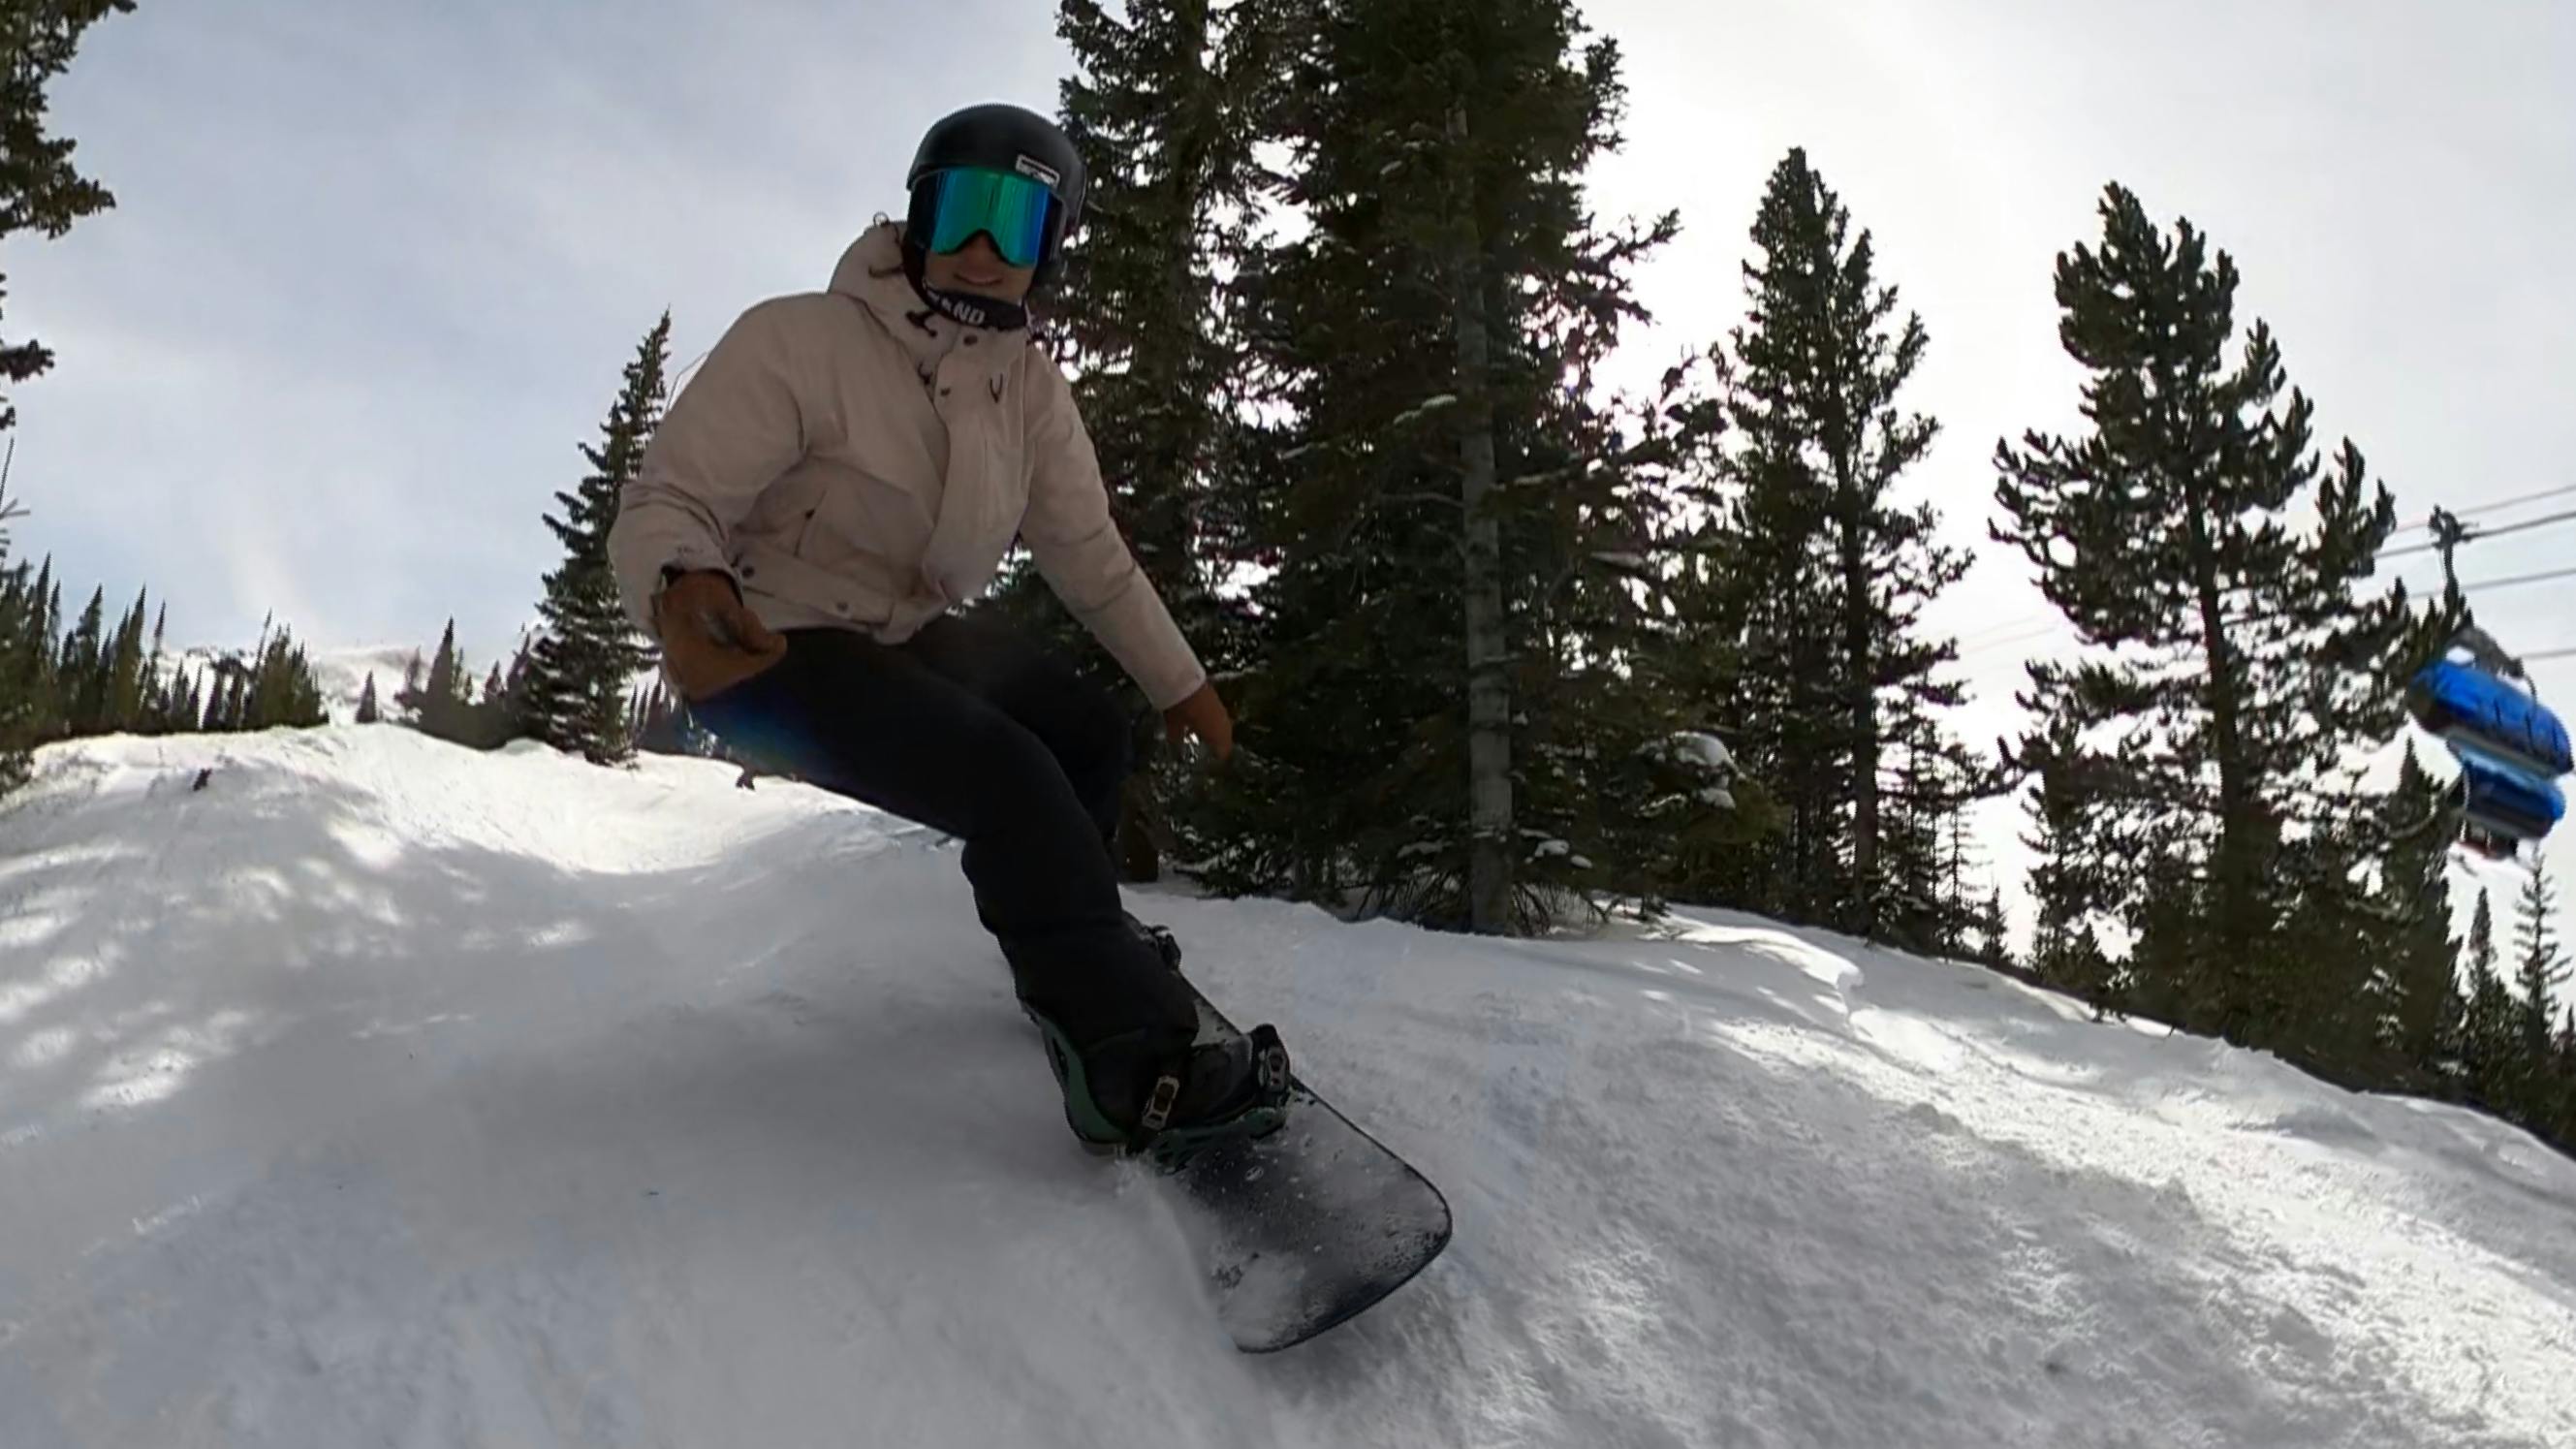 A snowboarder on the Arbor Draft Camber Snowboard.